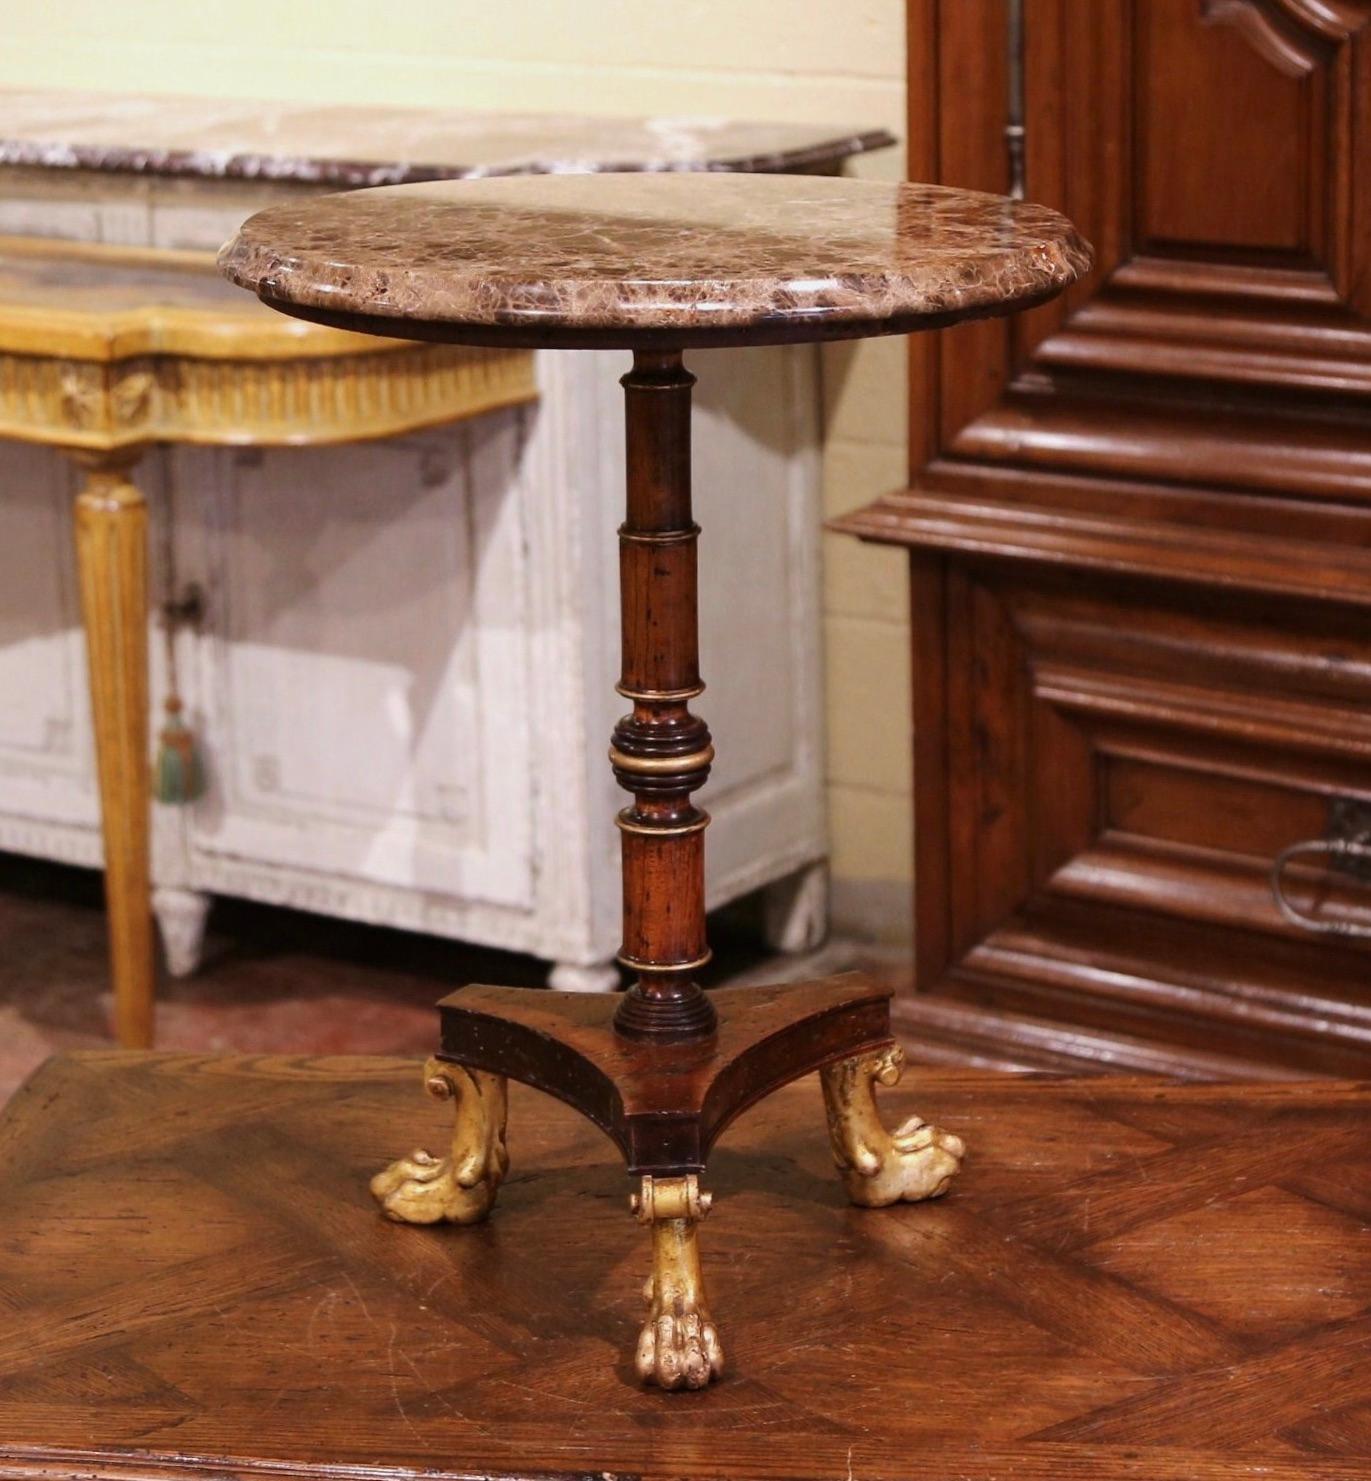 This elegant antique fruit wood and marble table was created in Paris, France, circa 1880. The pedestal stands on an intricate turned stem ending with three carved paw feet over a curved triangle base. The top is dressed with a circular variegated